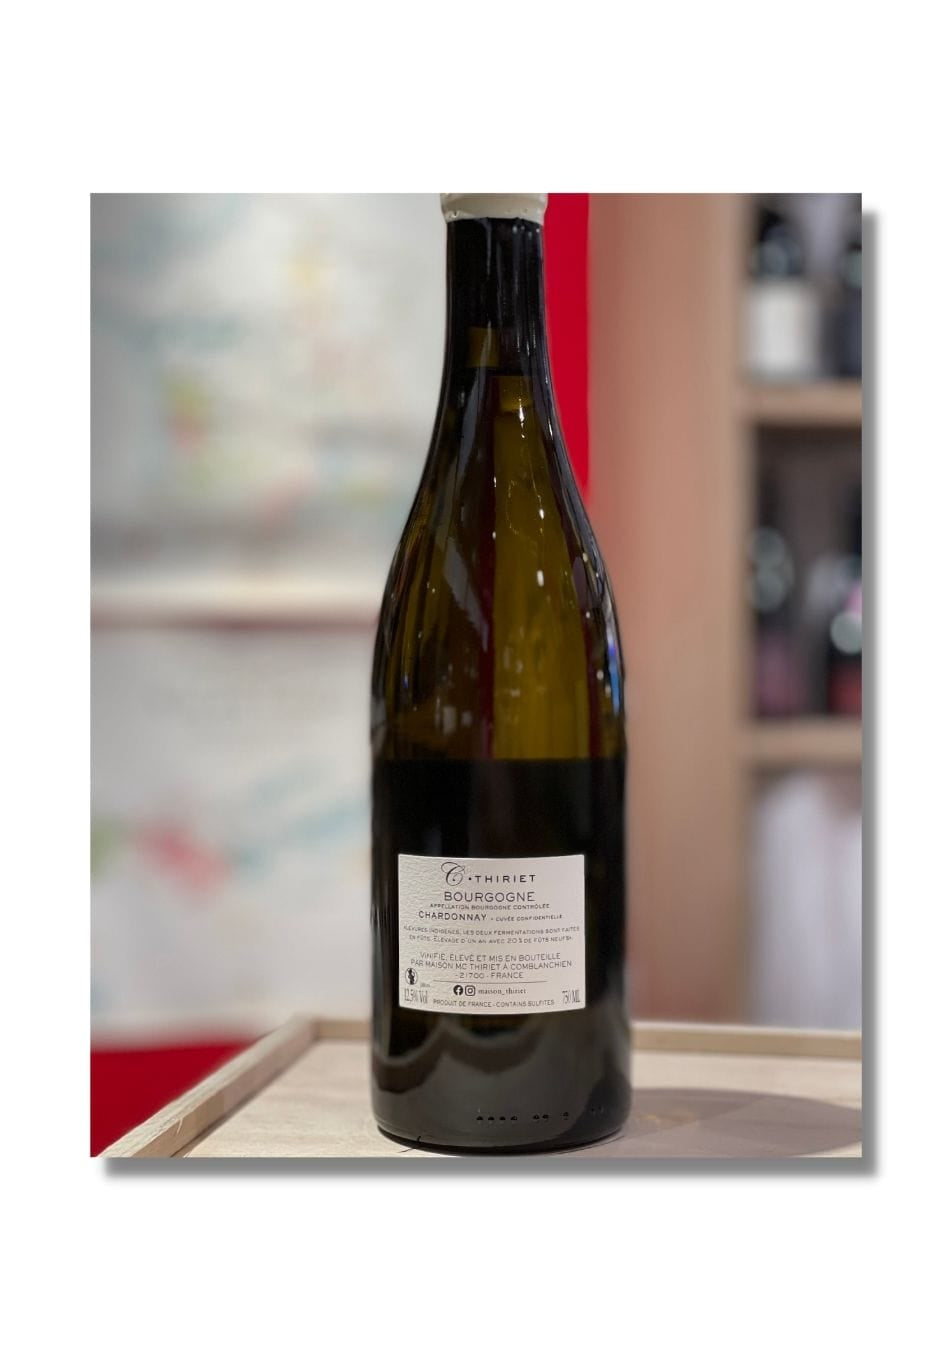 Shop Maison Thiriet Maison Thiriet Bourgogne Chardonnay Cuvee Confidentielle 2020 online at PENTICTON artisanal French wine store in Hong Kong. Discover other French wines, promotions, workshops and featured offers at pentictonpacific.com 